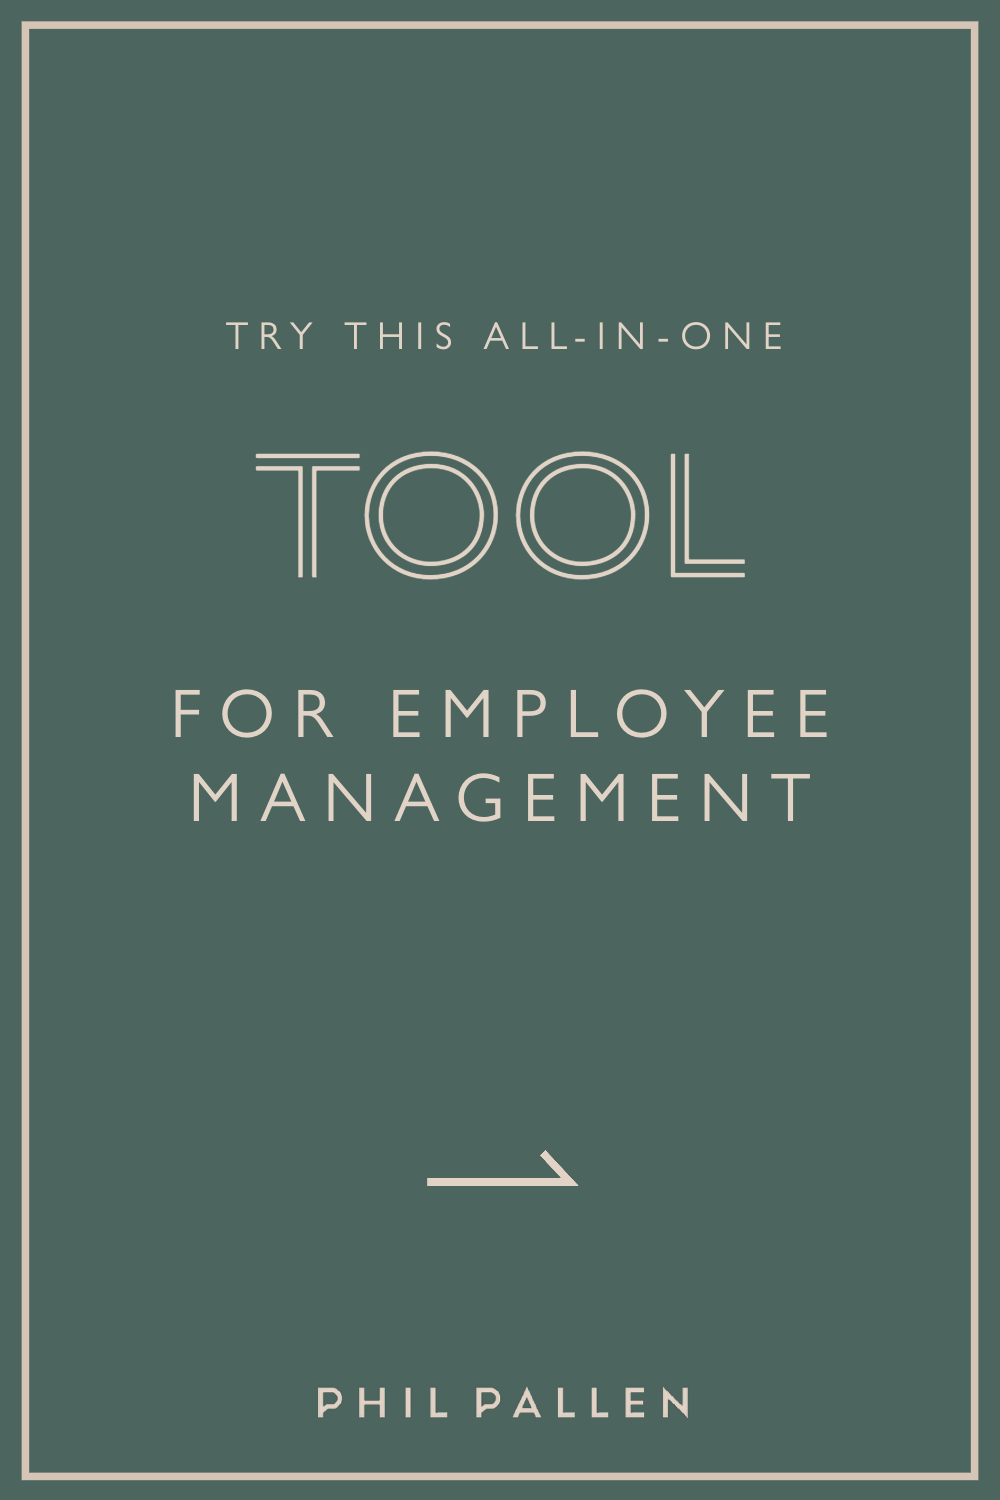 try-this-all-in-one-tool-for-employee-management.png